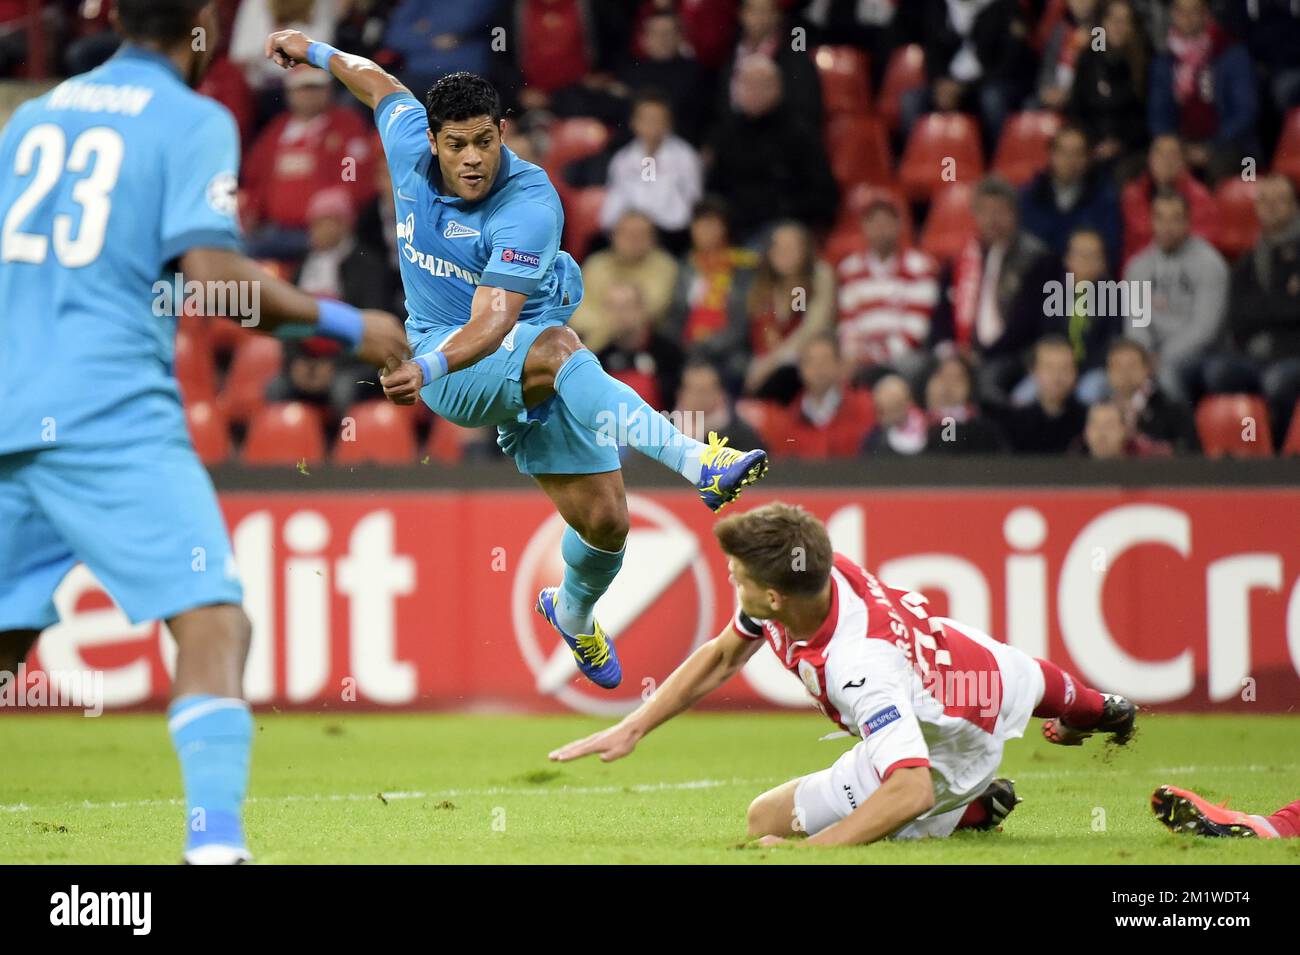 Zenit's Hulk and Standard's Dino Arslanagic fight for the ball during the first leg match between Belgian first division soccer team Standard de Liege and Russian team FC Zenit Saint Petersburg in the playoffs for the UEFA Champions League competition, Wednesday 20 August 2014, in Liege. Stock Photo